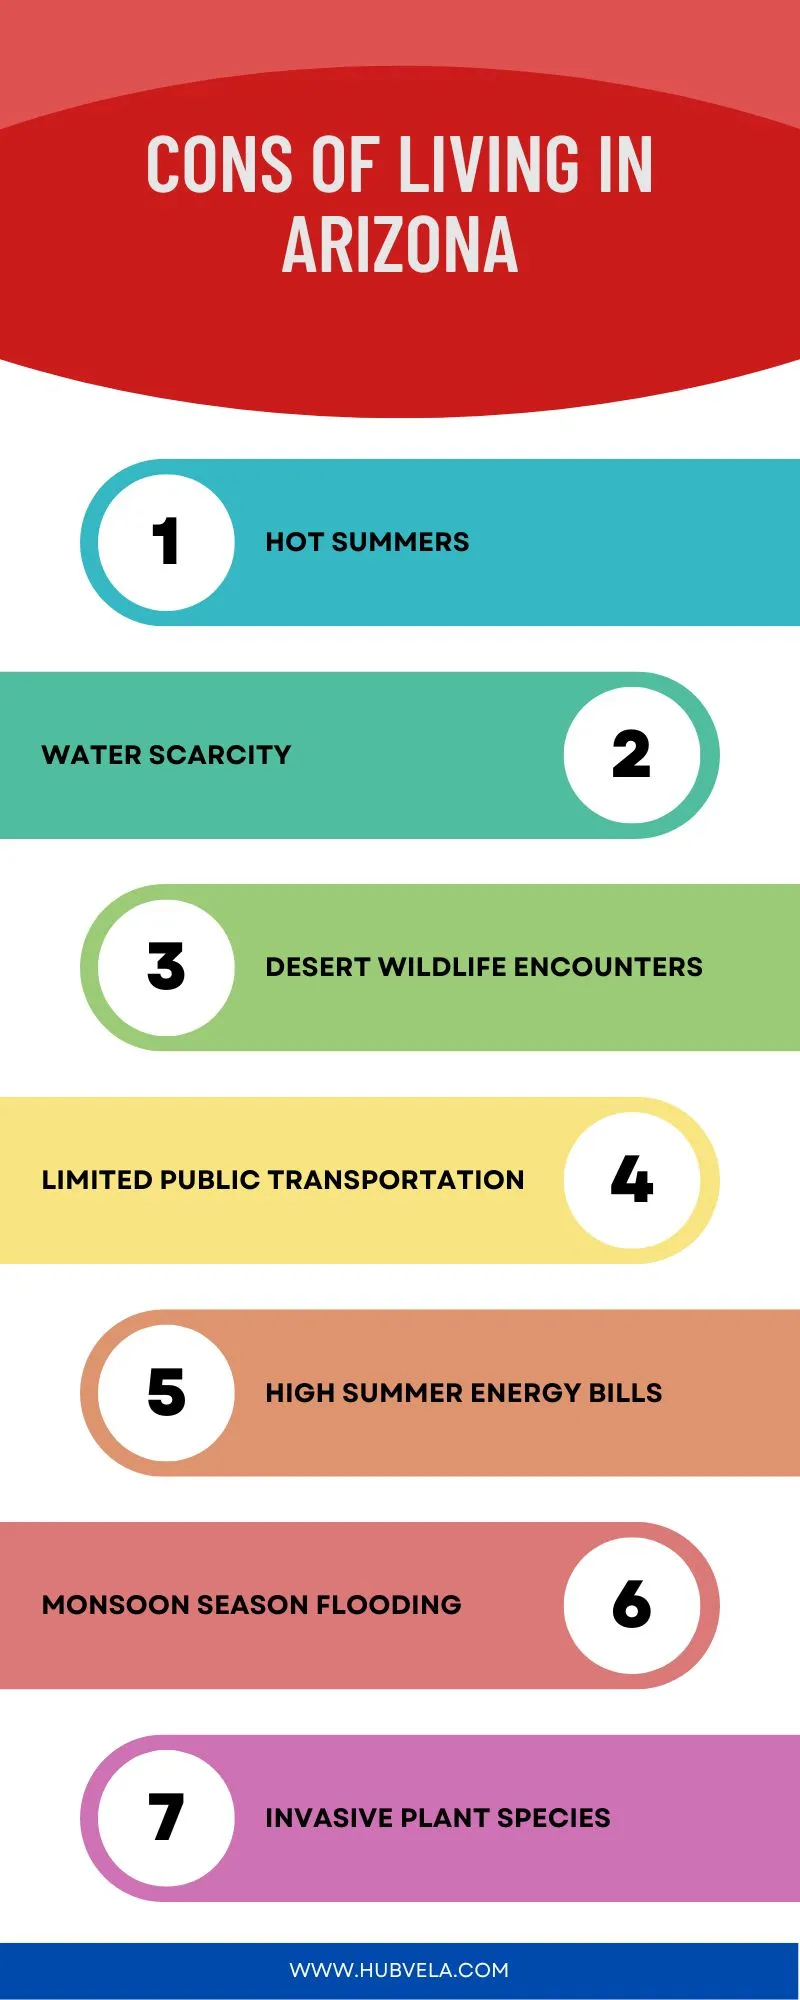 Cons of Living in Arizona Infographic